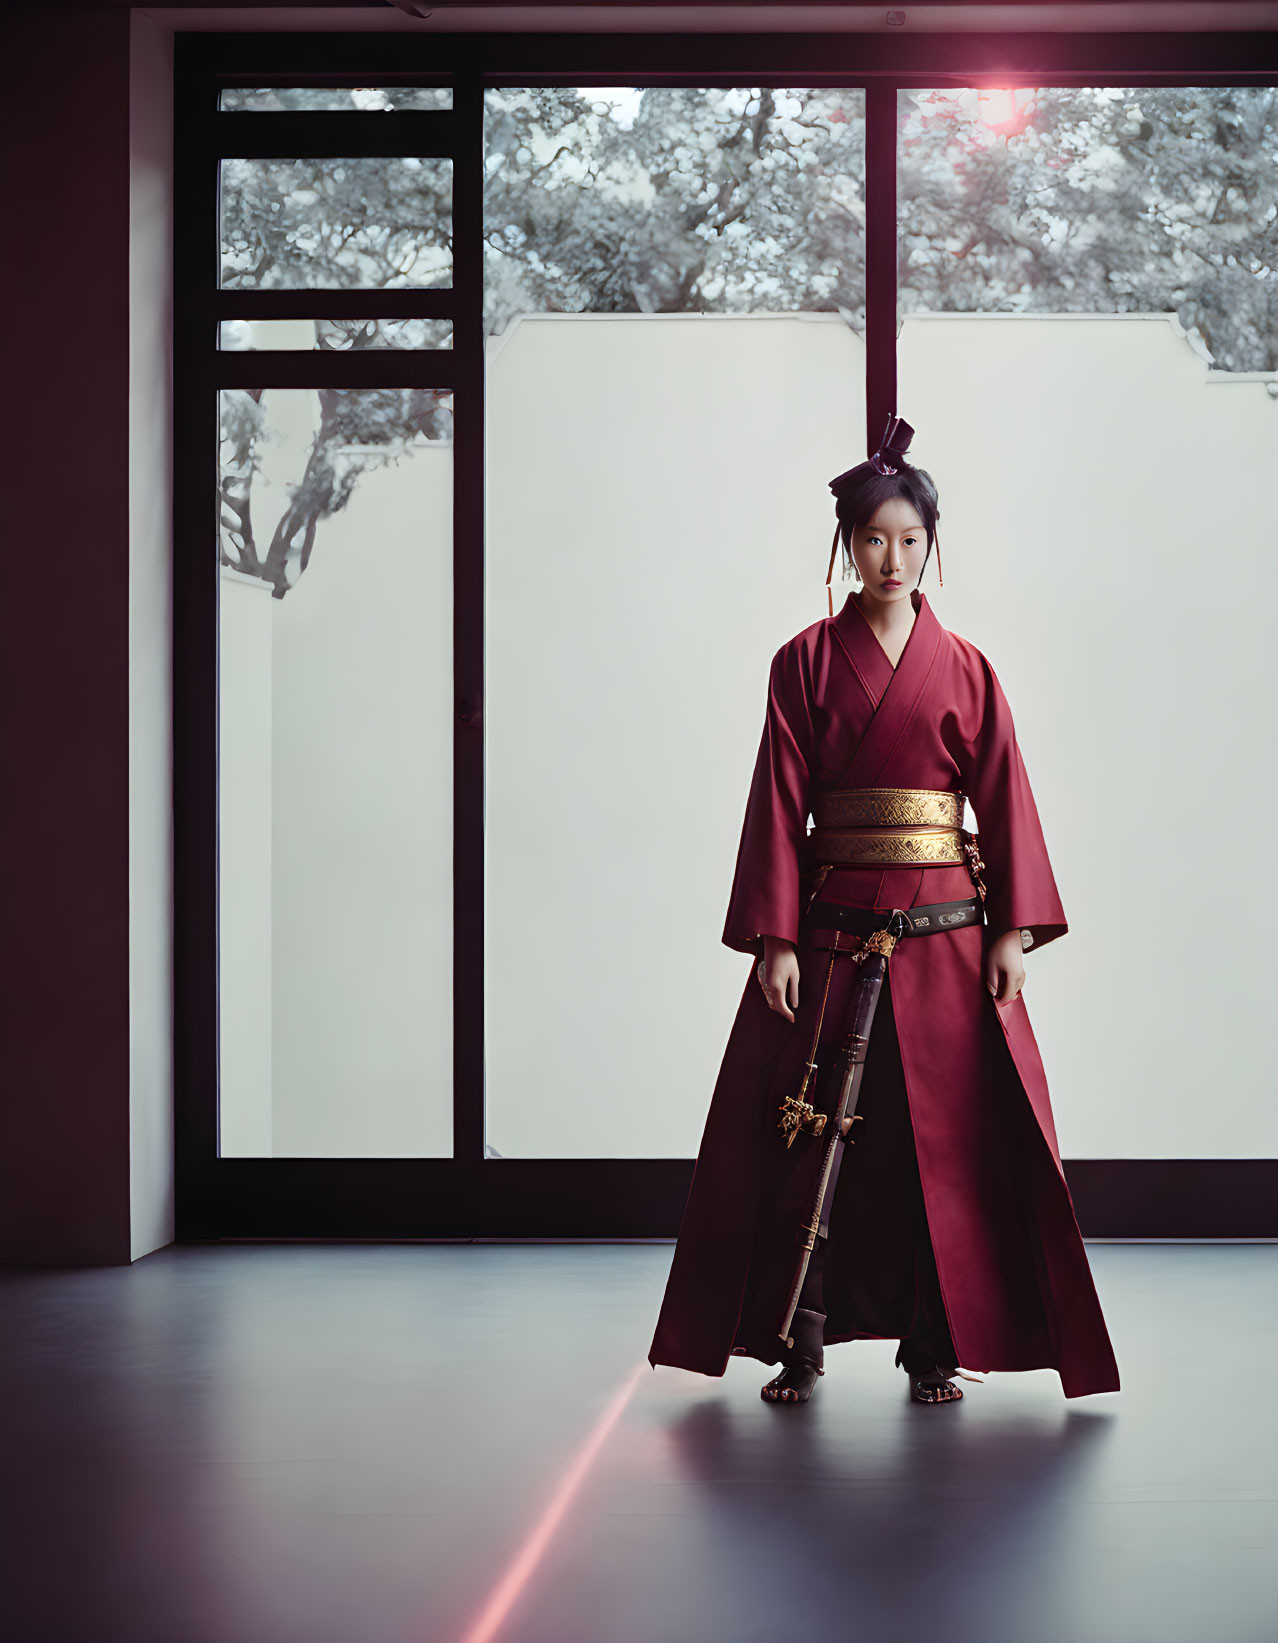 Traditional Japanese attire figure with katana in modern room overlooking tree